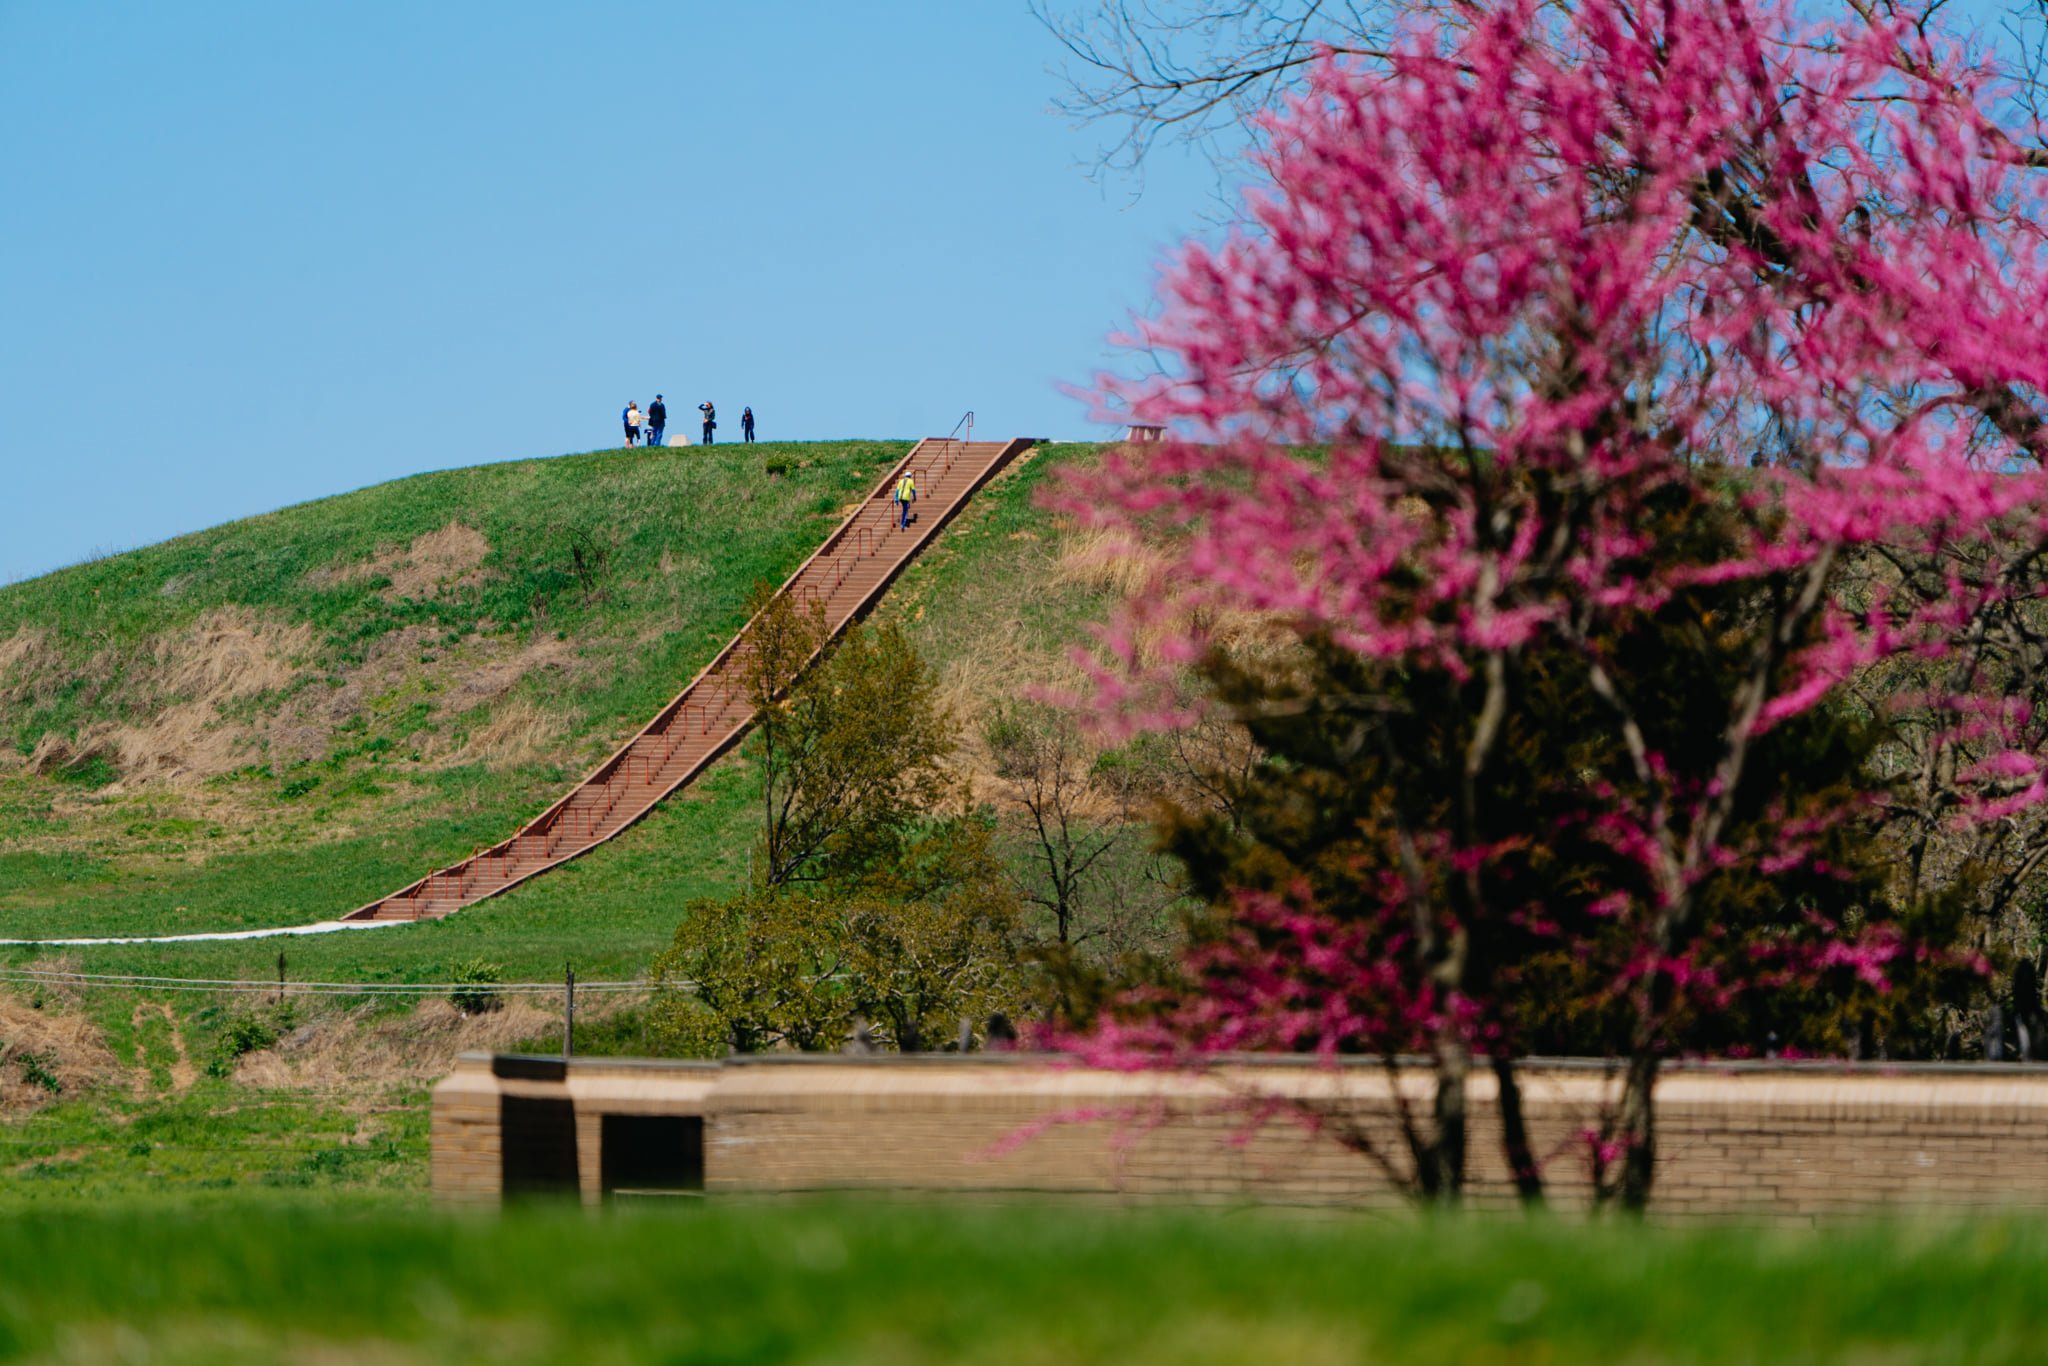 The Cahokia Mounds In Illinois Have A